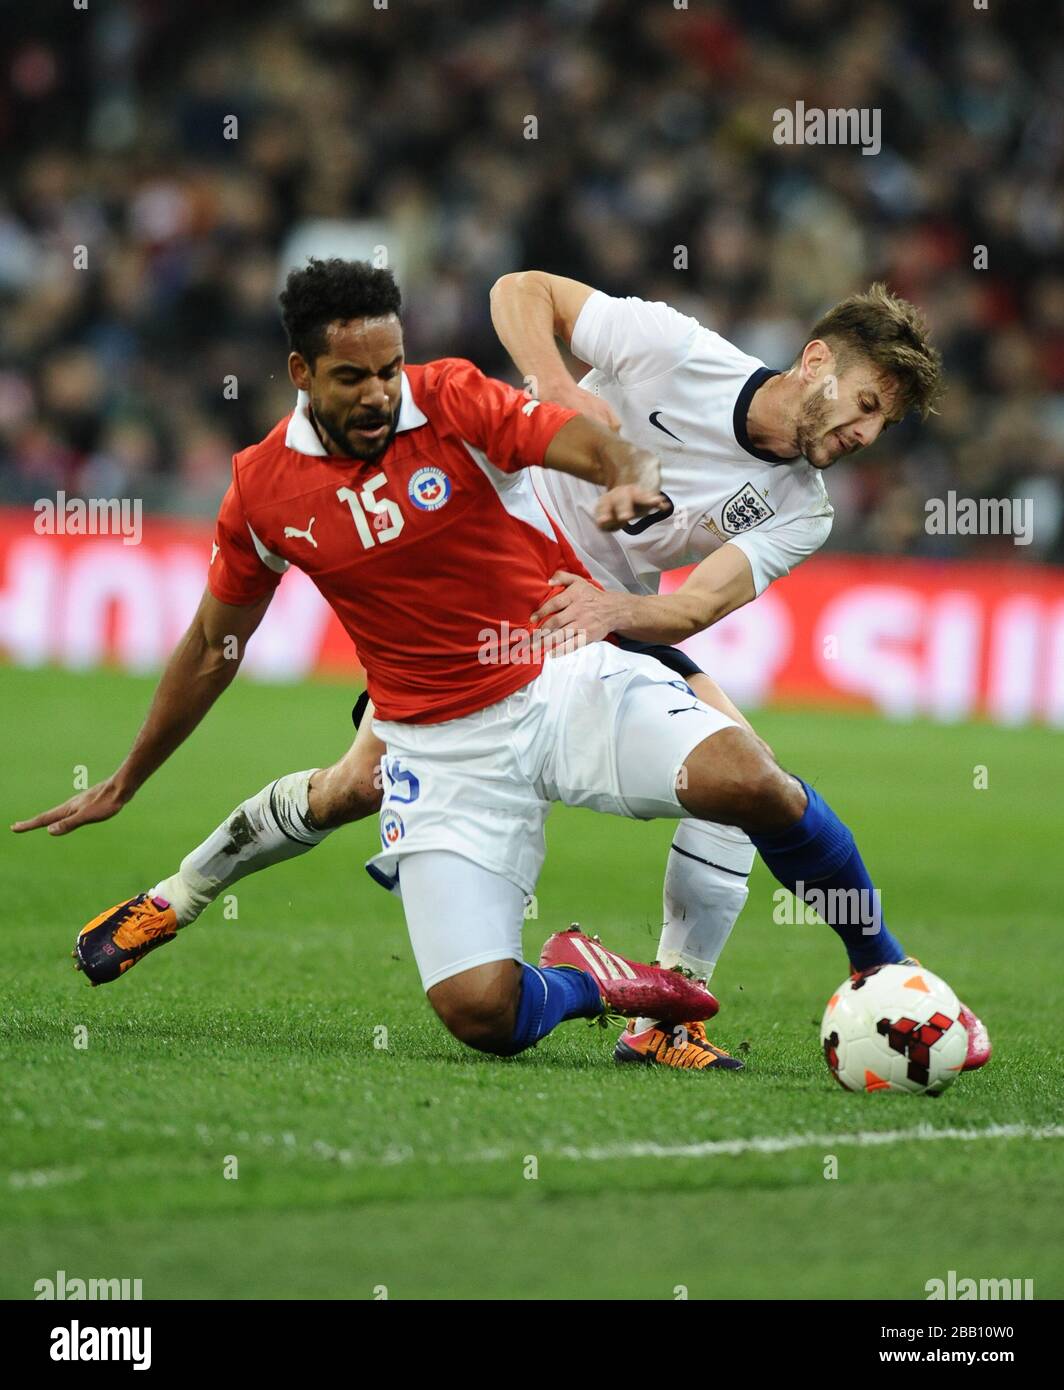 England's Adam Lallana (right) tackles Chile's Jean Beausejour (left) Stock Photo